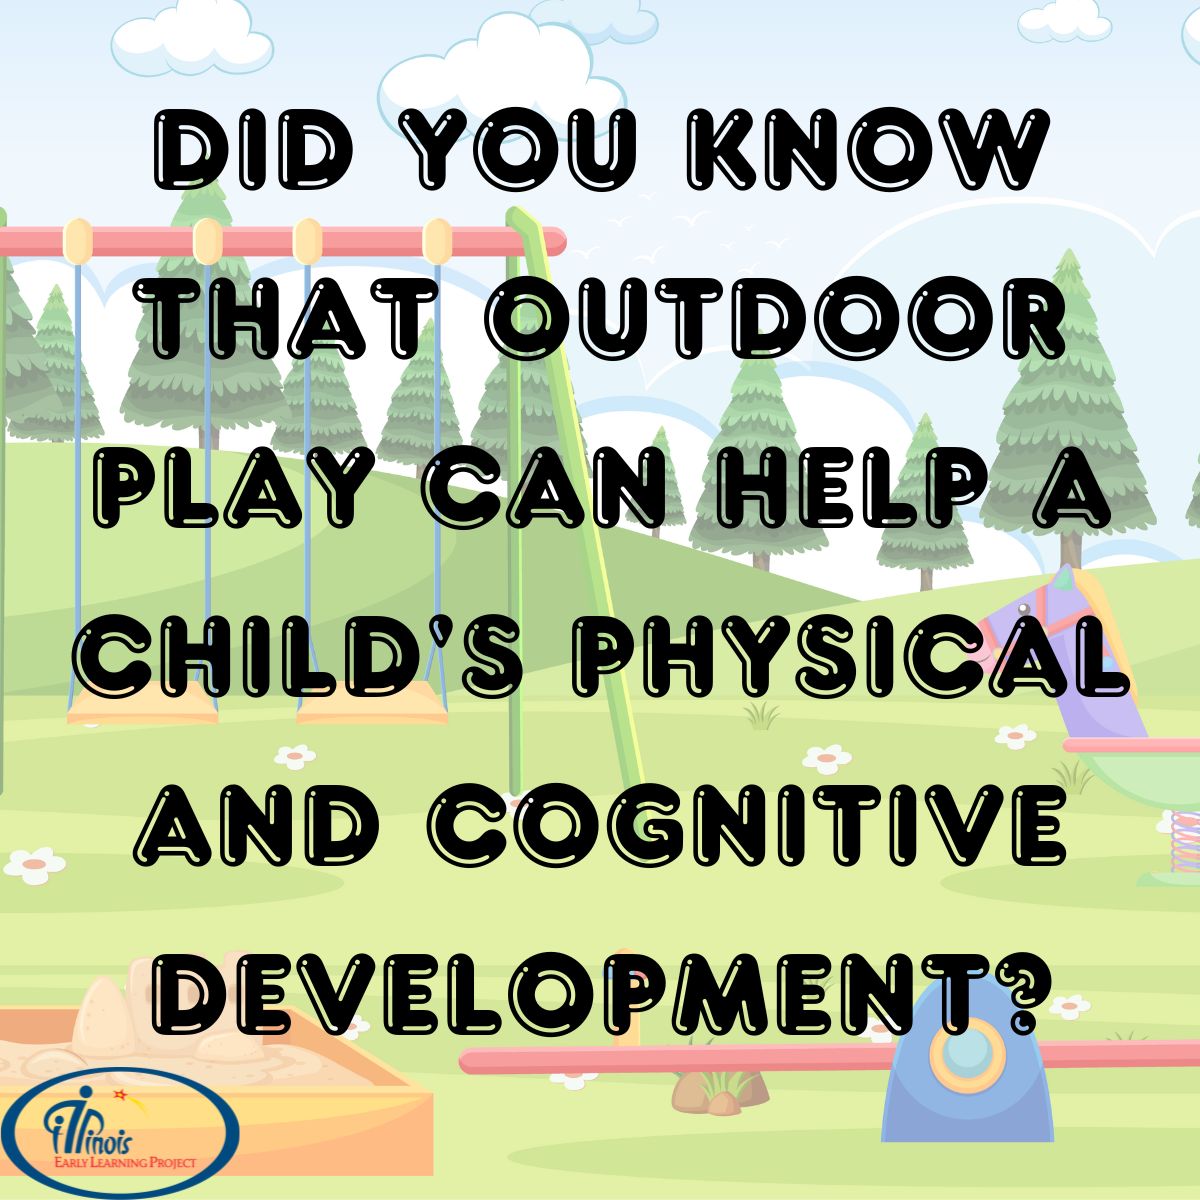 Did you know that outdoor play can help a child's physical and cognitive development? 
#ChildDevelopment #Outdoors #IllinoisEarlyLearning